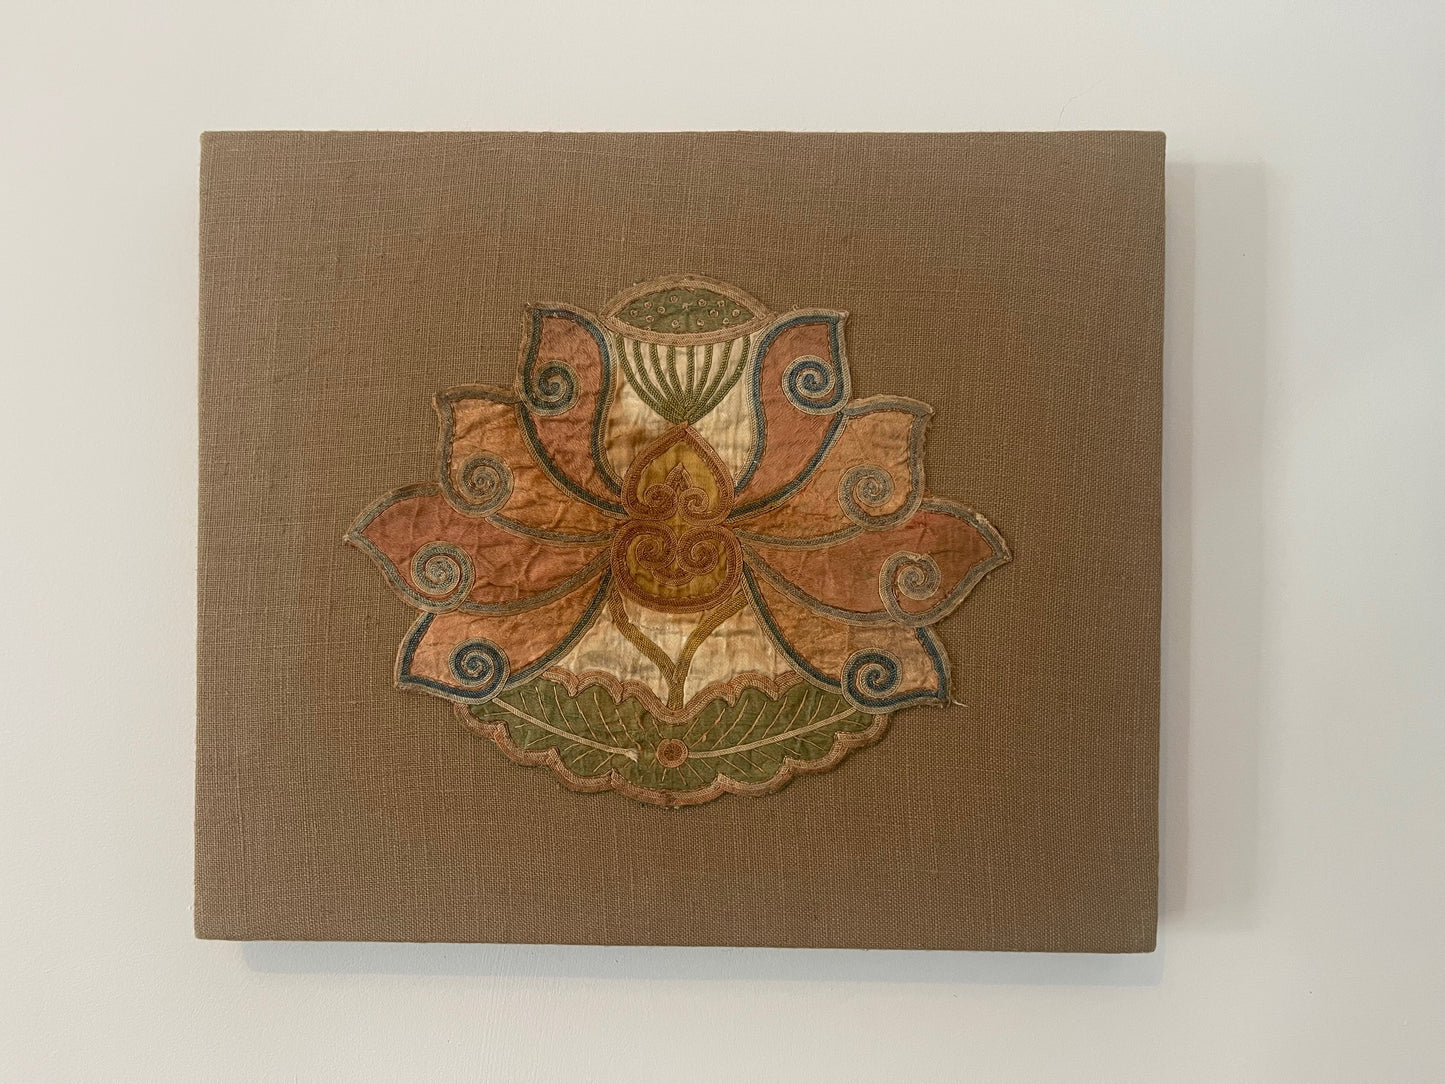 An antique lotus applique art mounted on a fabric frame